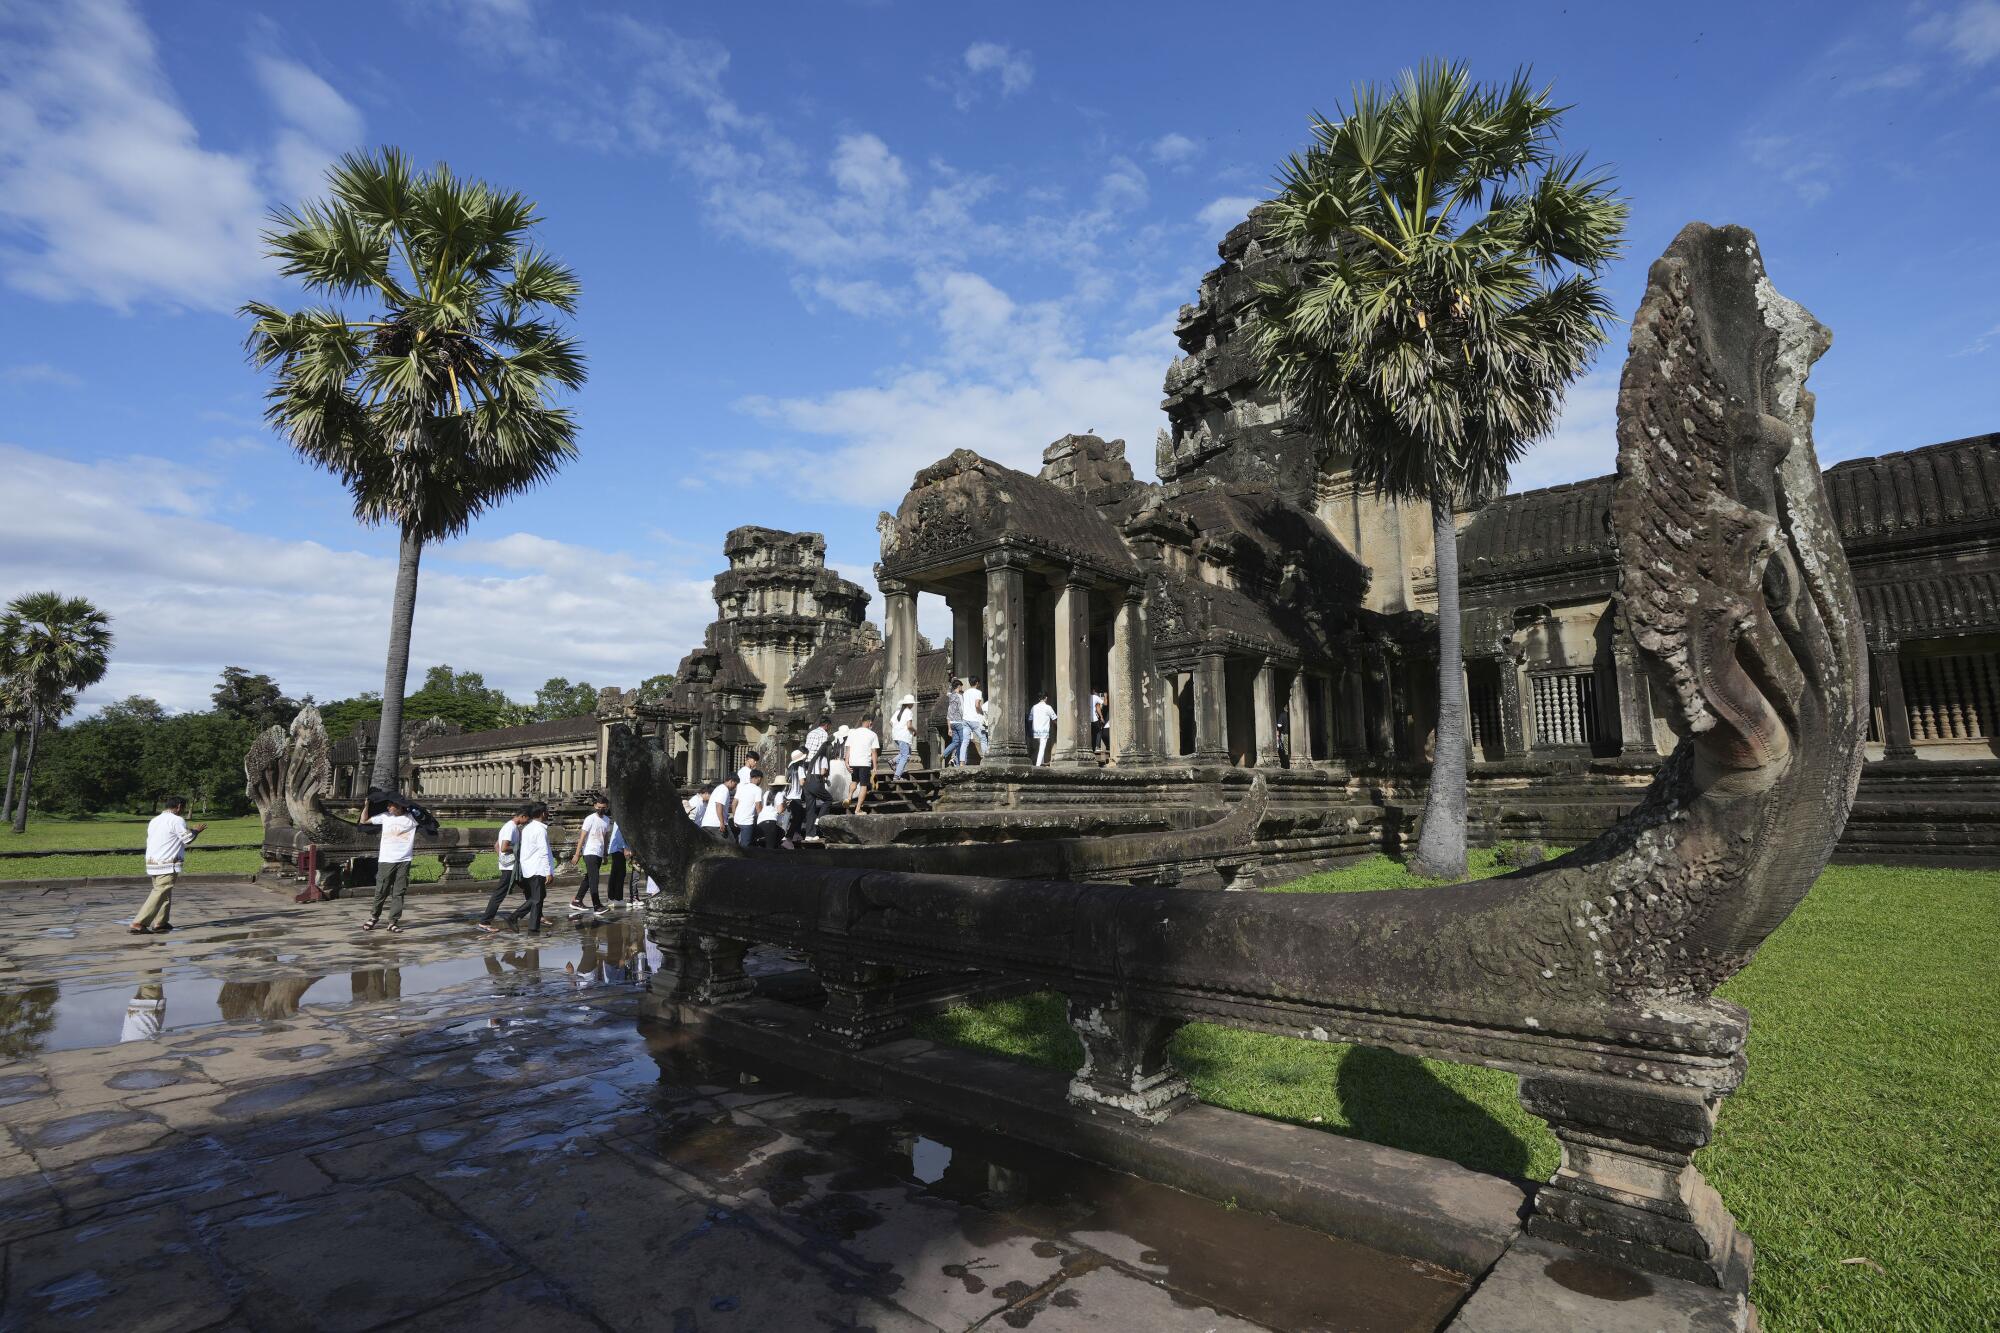 Tourists visit the Angkor Wat temple in Siem Reap, Cambodia, Wednesday, Nov. 2023